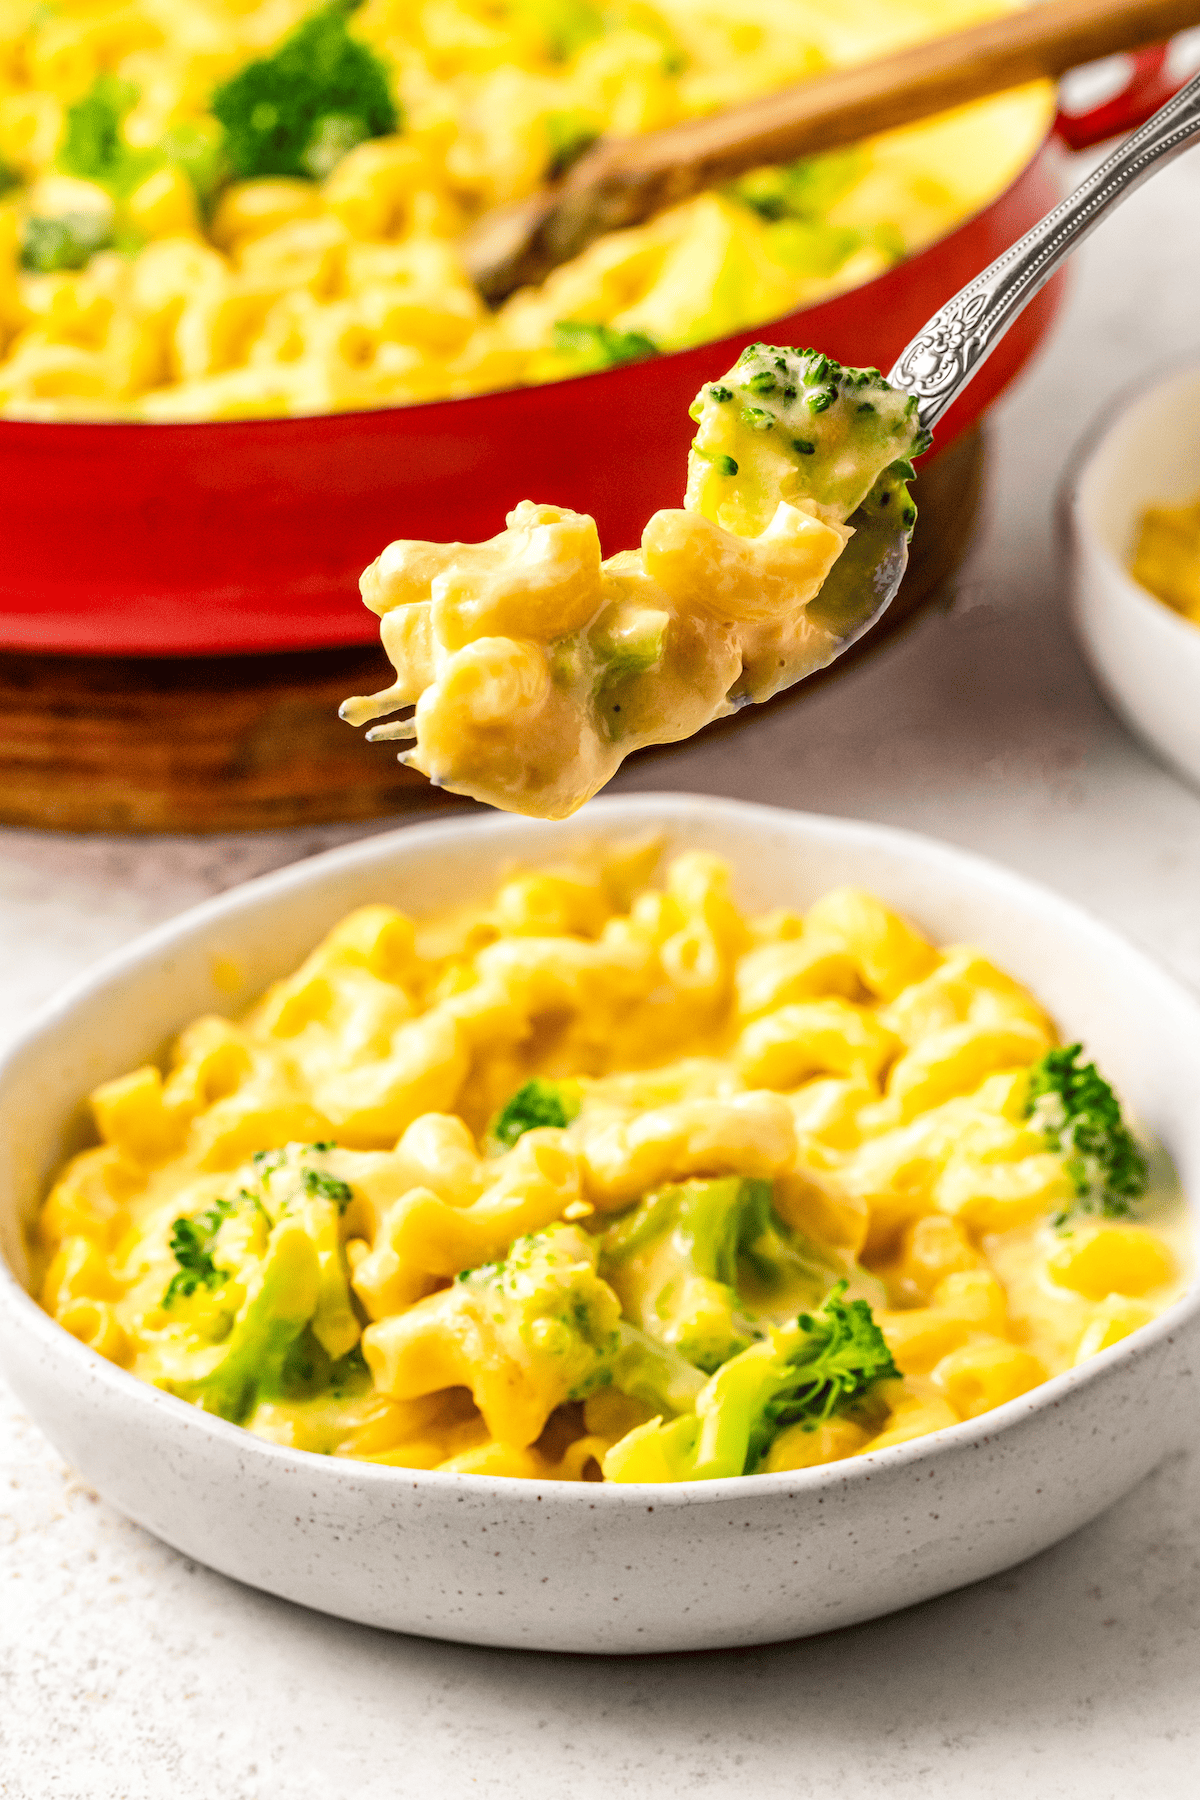 Forkful of macaroni and cheese with broccoli.